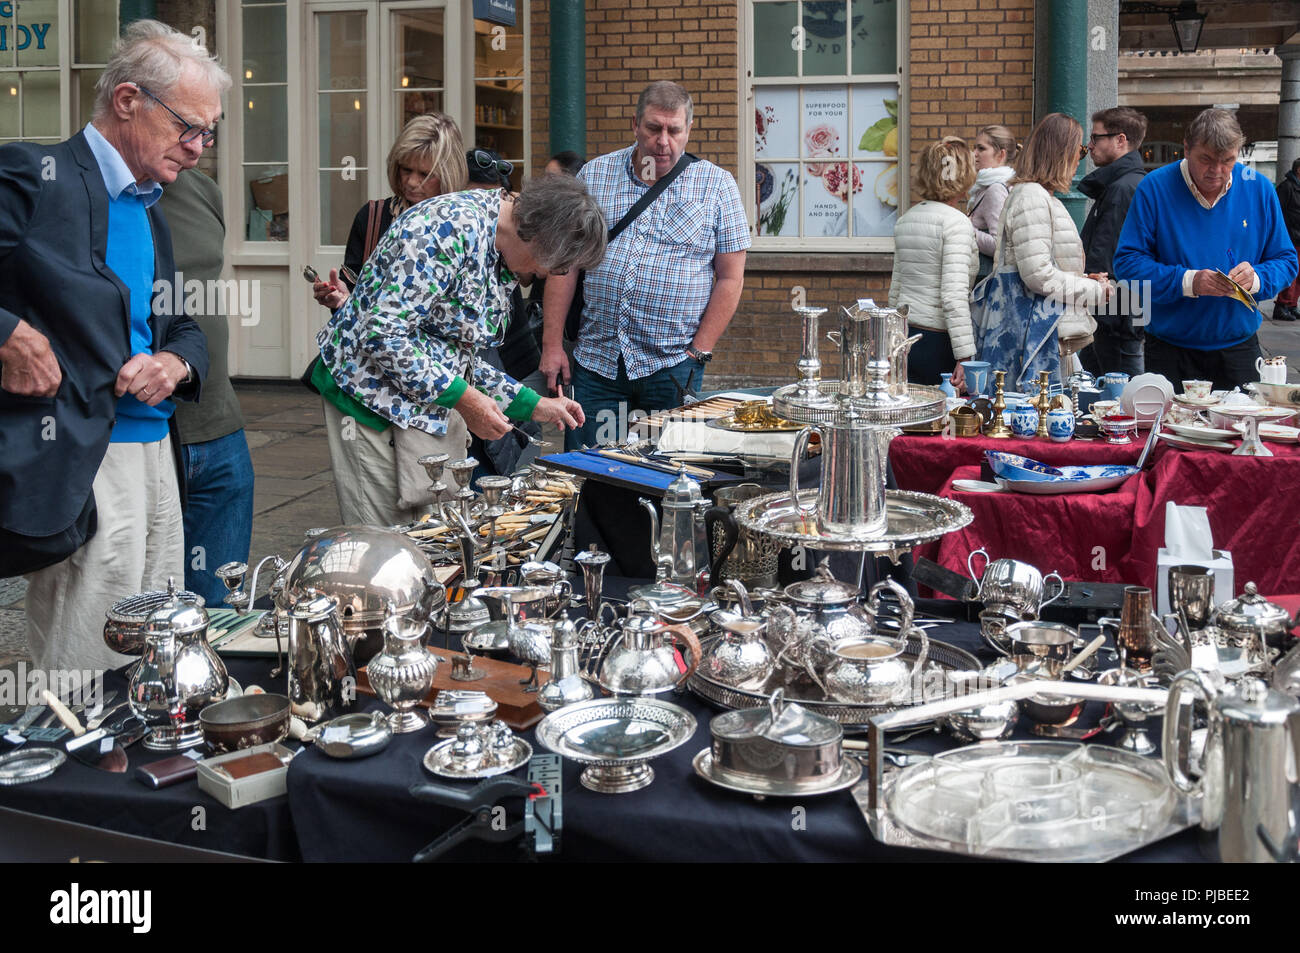 People browsing at a silverware stall in the market, Covent Garden, London, England, UK Stock Photo